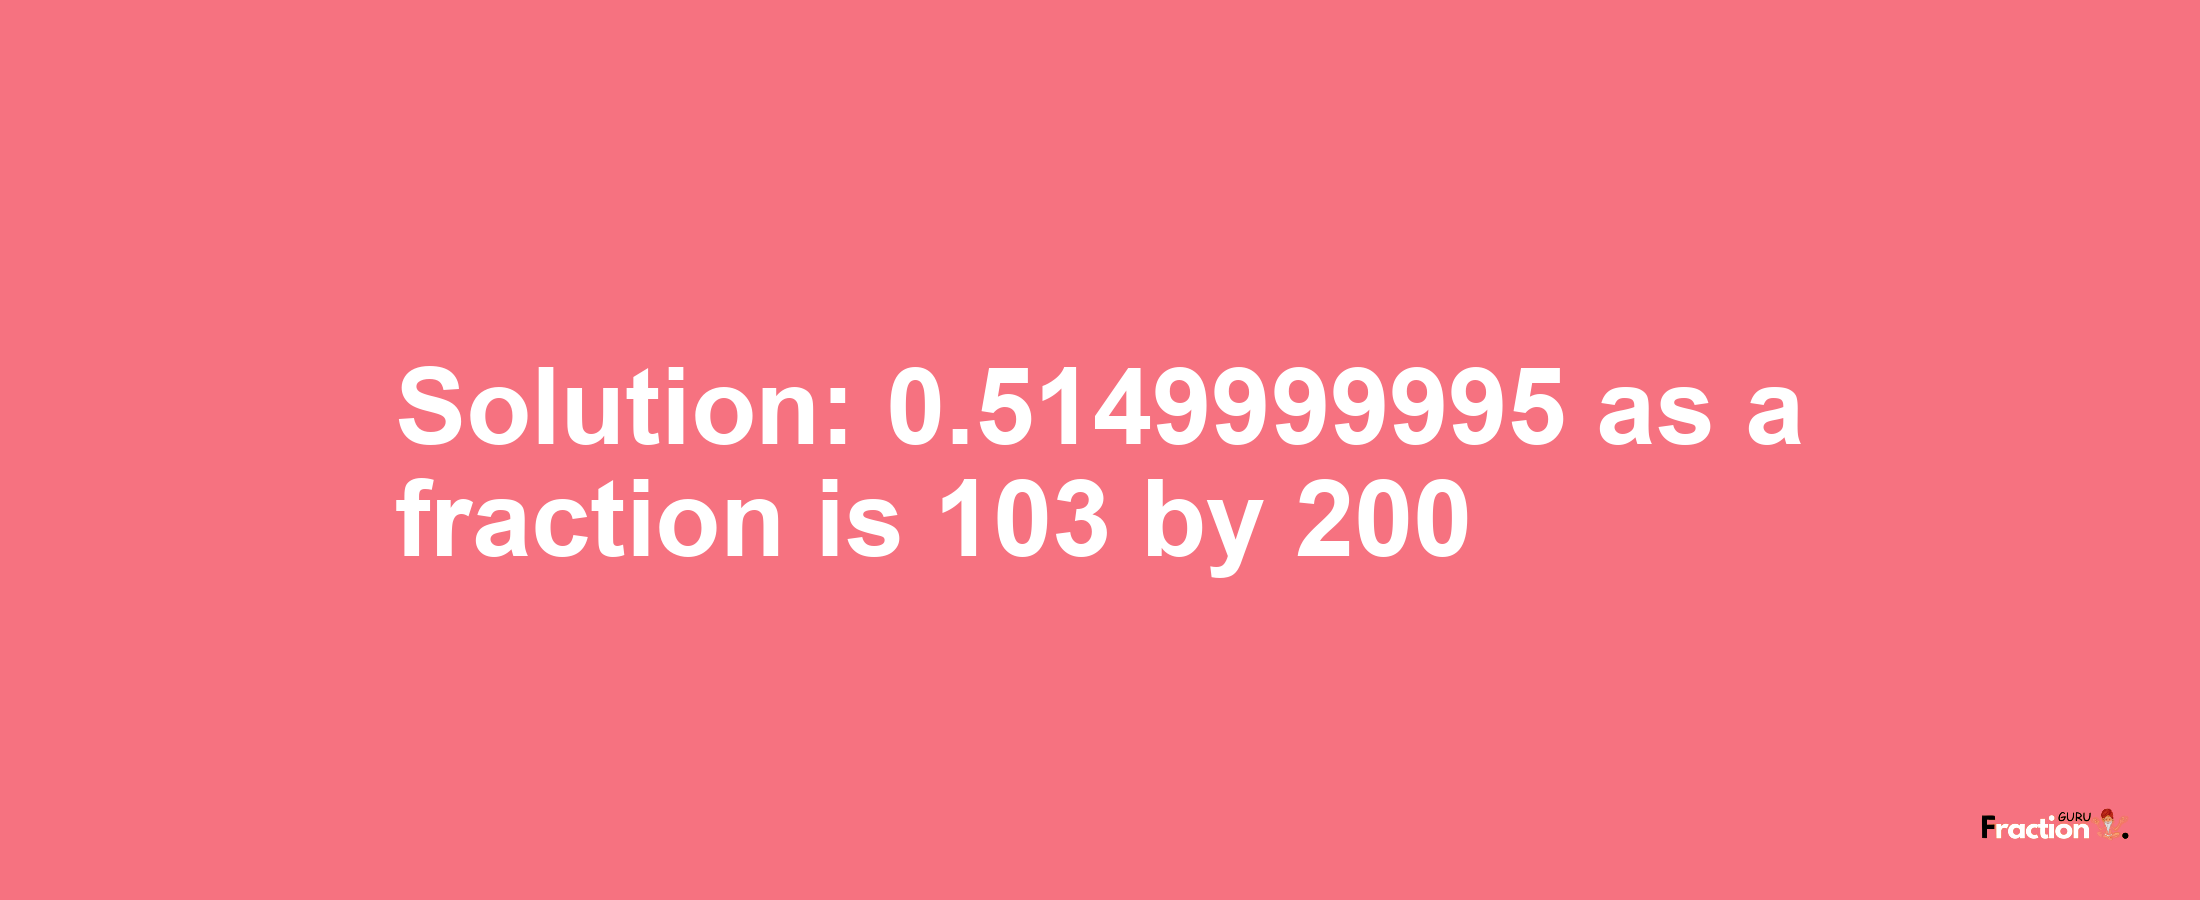 Solution:0.5149999995 as a fraction is 103/200